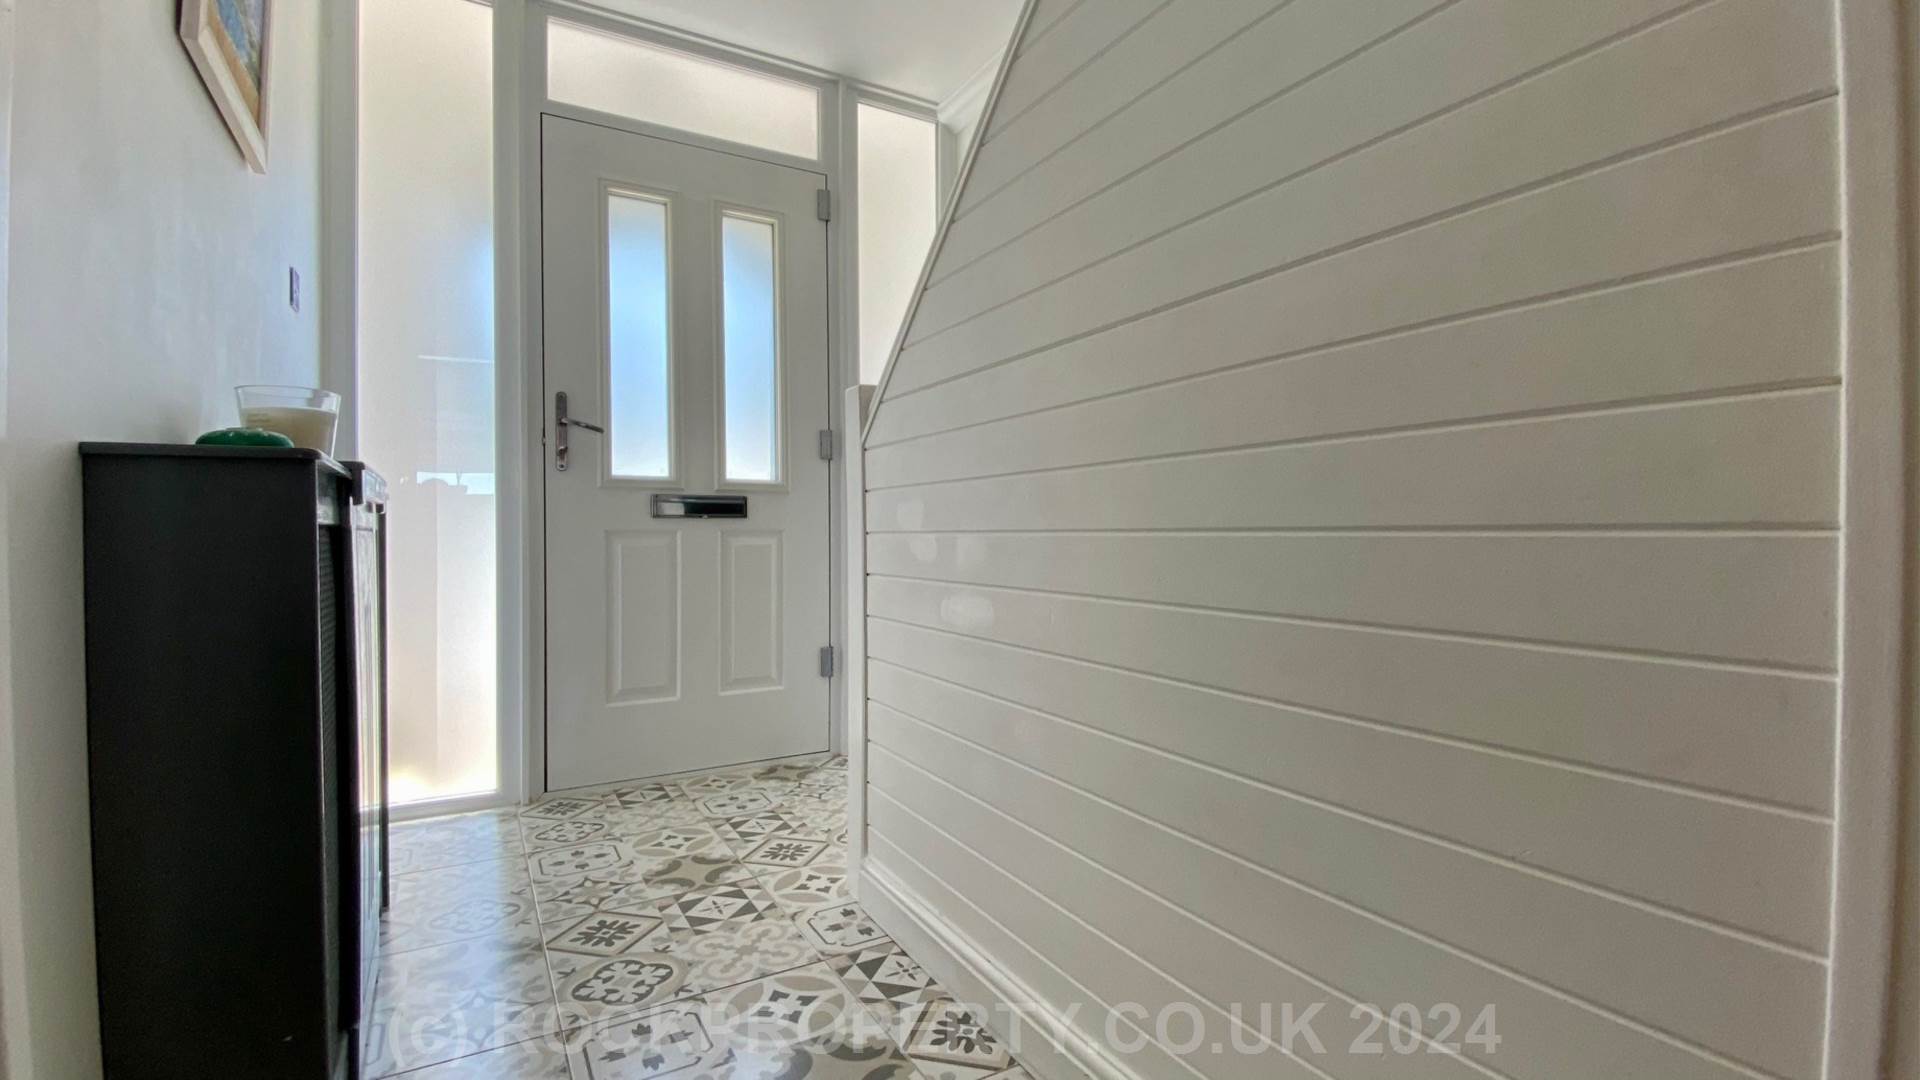 MODERN 3 BED FAMILY HOME, Langley Park, St Saviour, Image 18